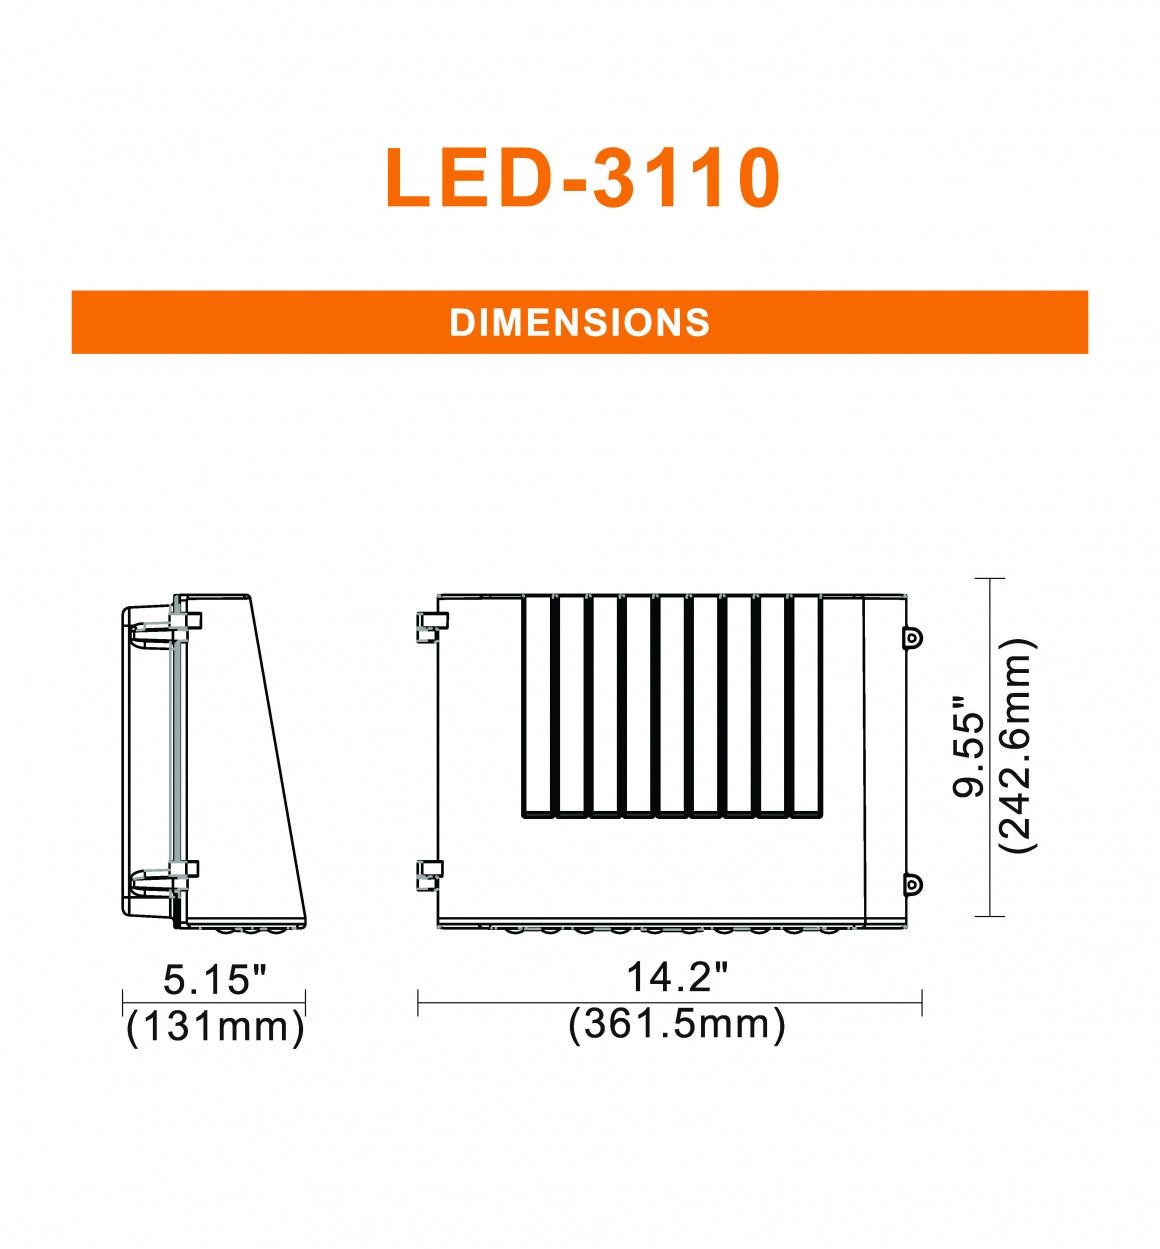 LED Full Cut Off Wall Pack, 7237 Lumen Max, Wattage 25W/45W/55W and CCT Selectable 3000K/4000K/5000K, Integrated Photocell, 120-277V